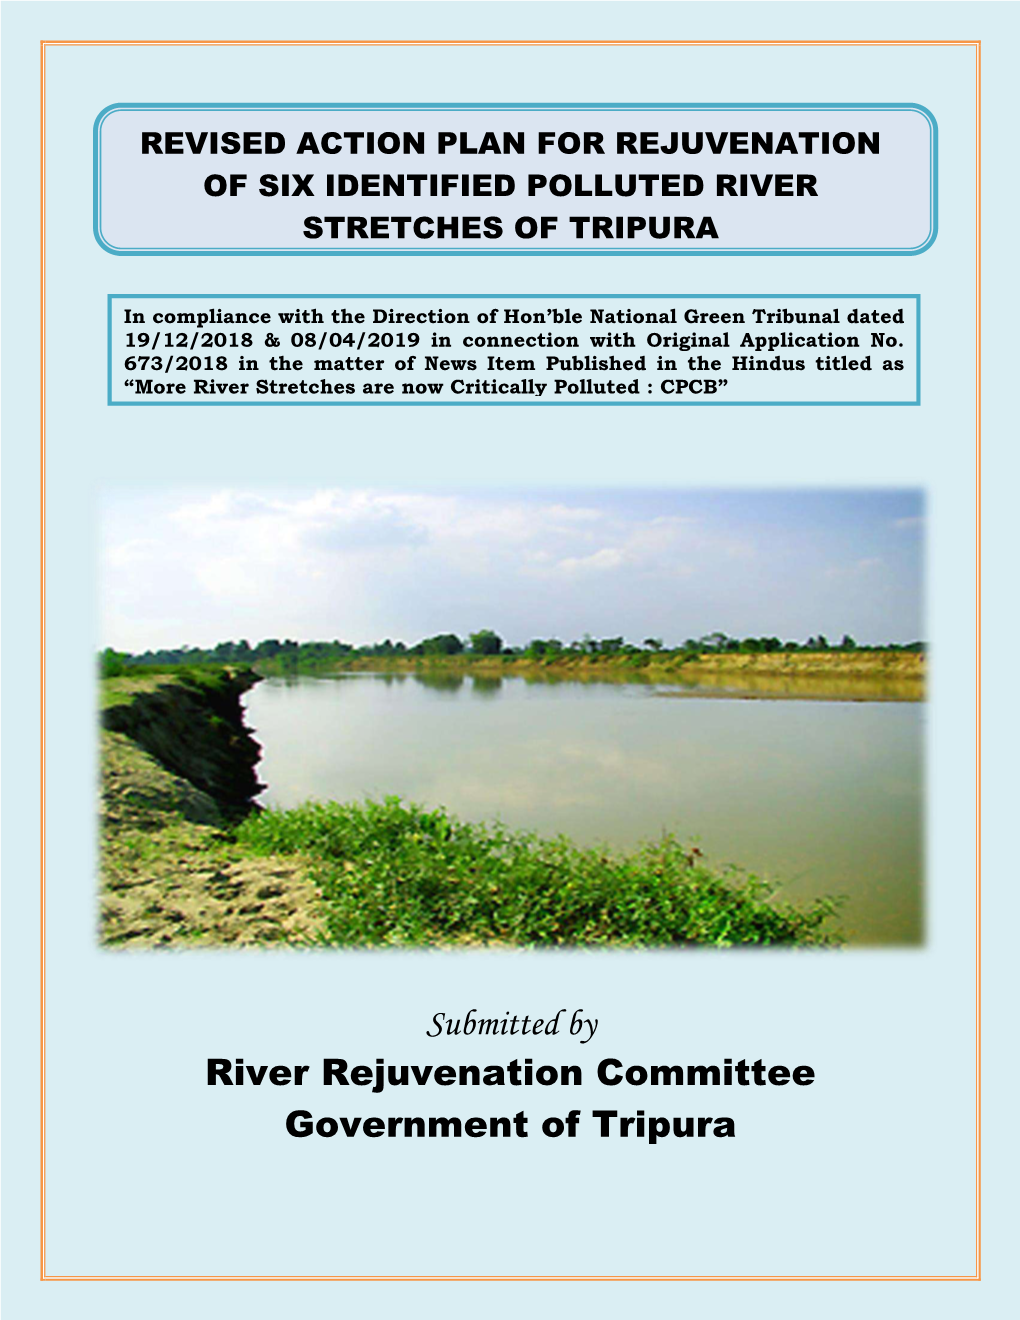 Revised Action Plan for Rejuvenation of Six Identified Polluted River Stretches of Tripura